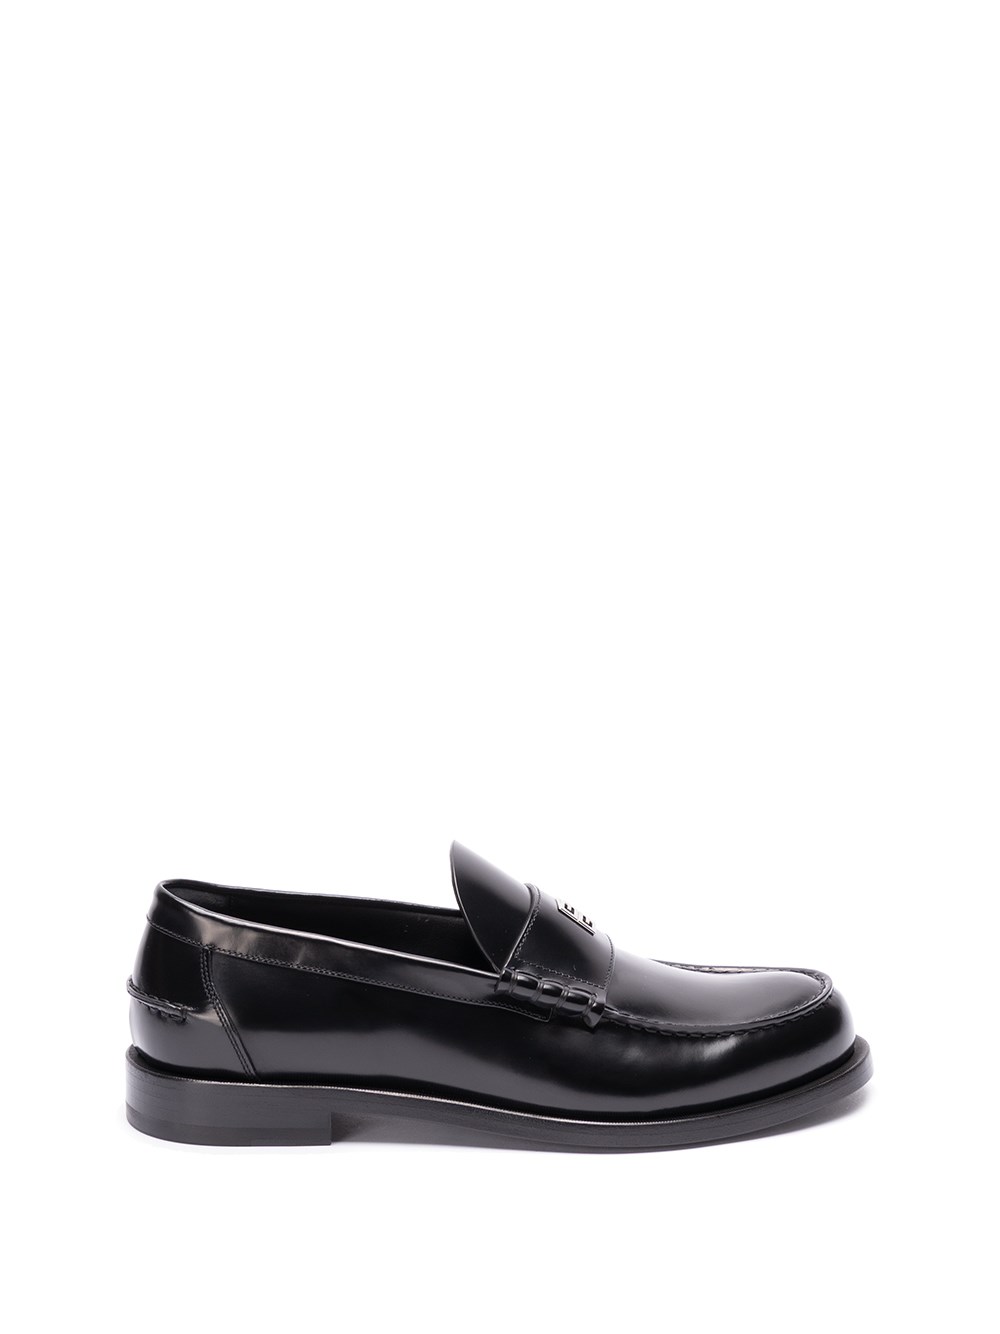 Givenchy Loafers In Black  